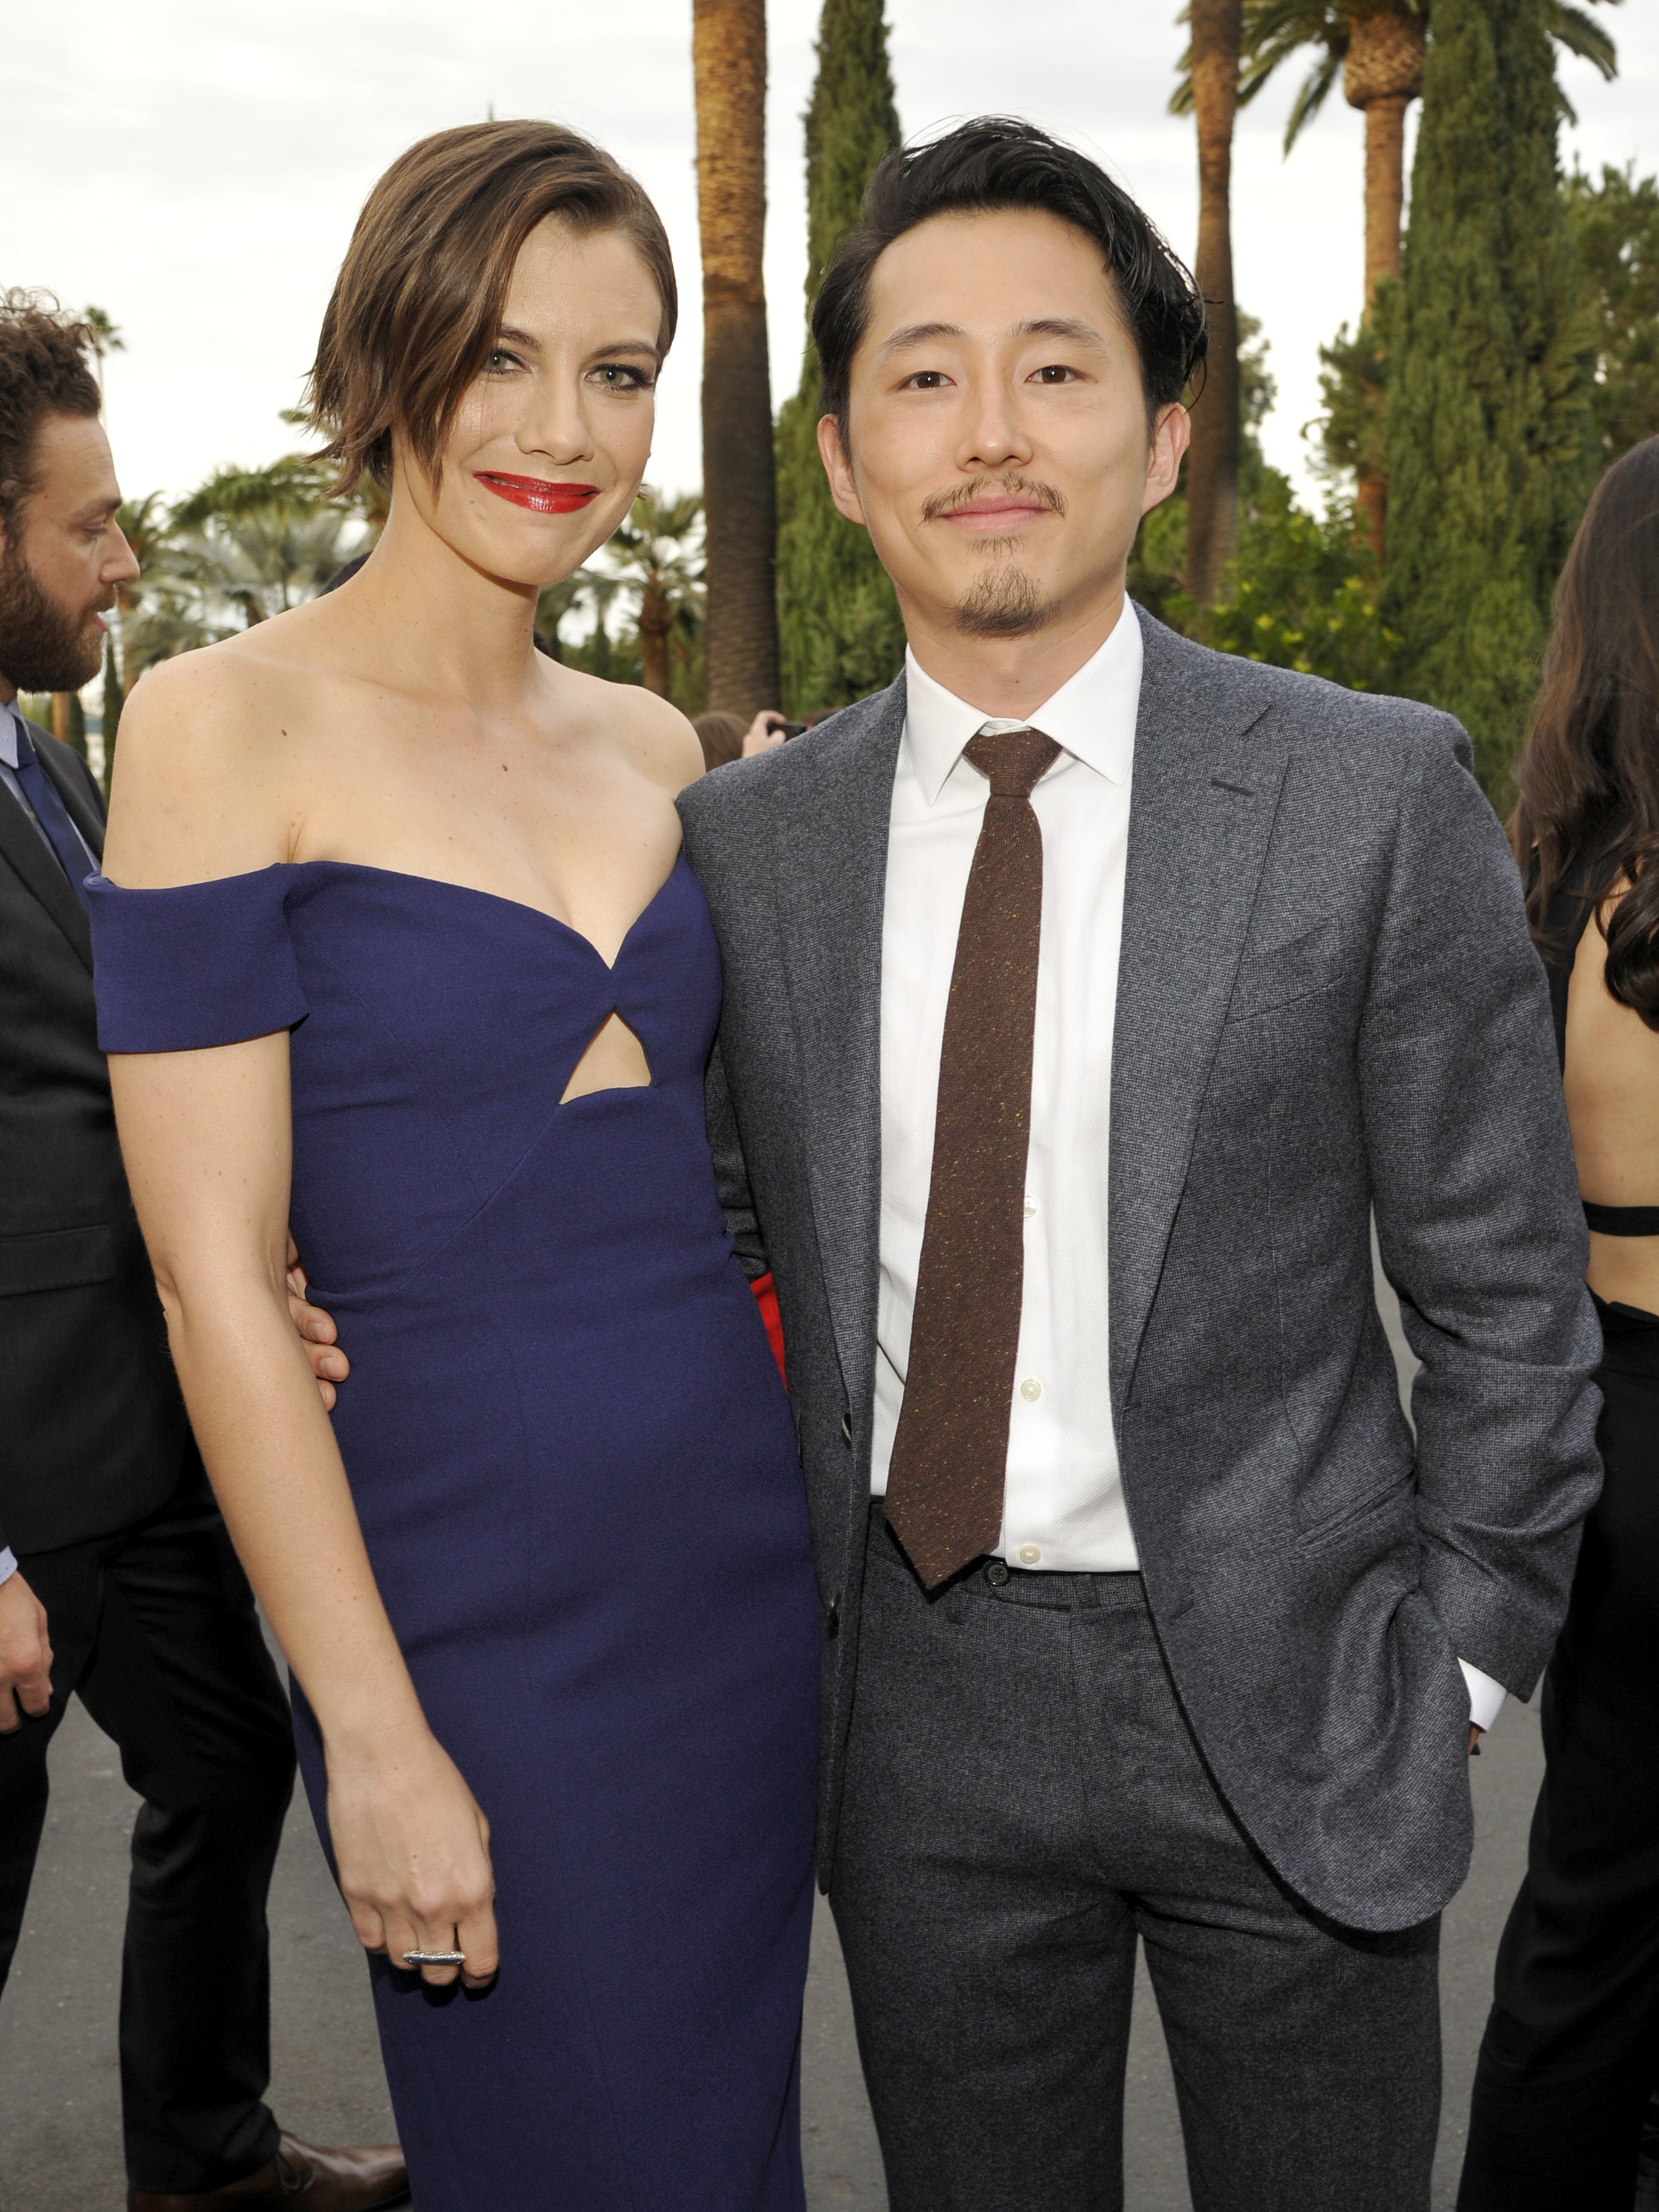 Lauren Cohan and Steven Yeun at the Talking Dead Live in 2016